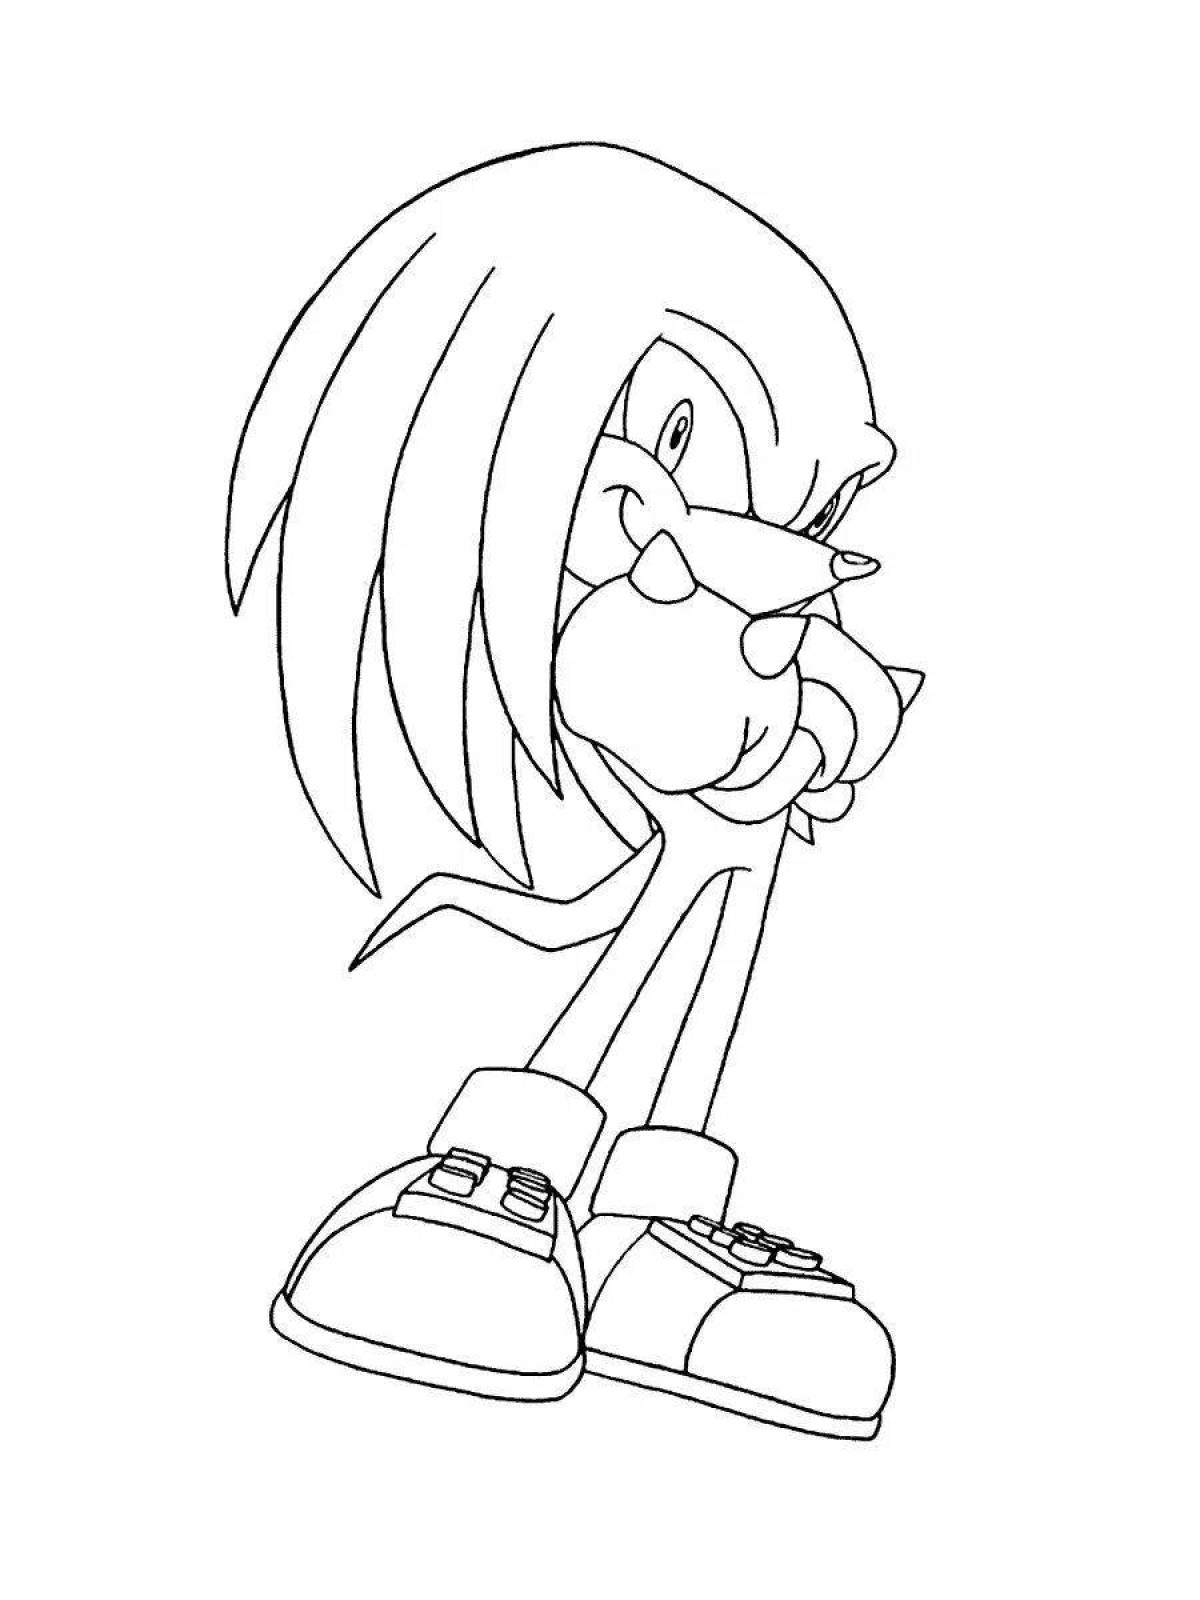 Coloring book bright echidna knuckles